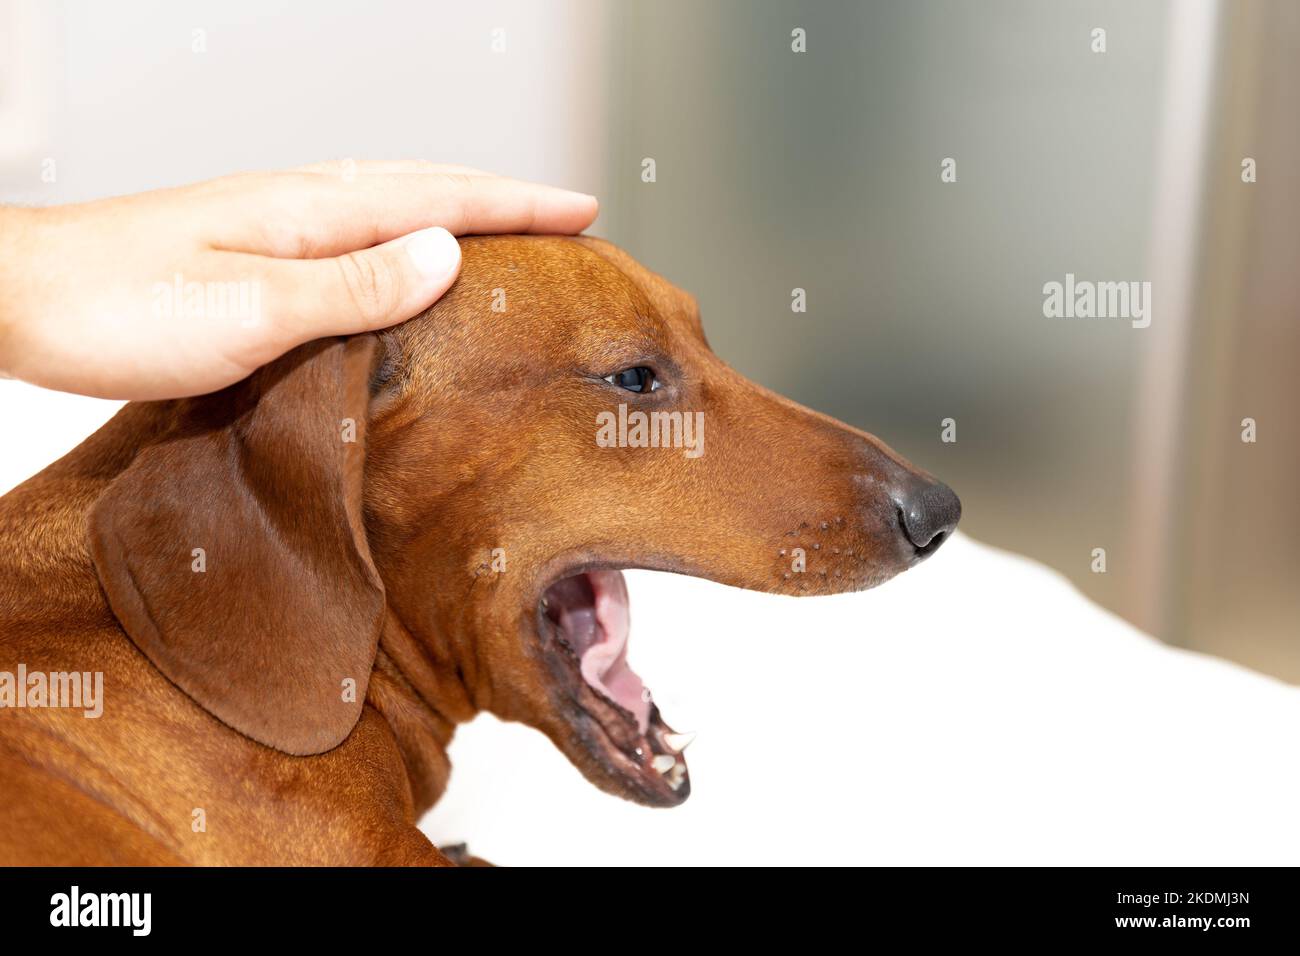 The dachshund dog with funny snout on the bed in the room Stock Photo